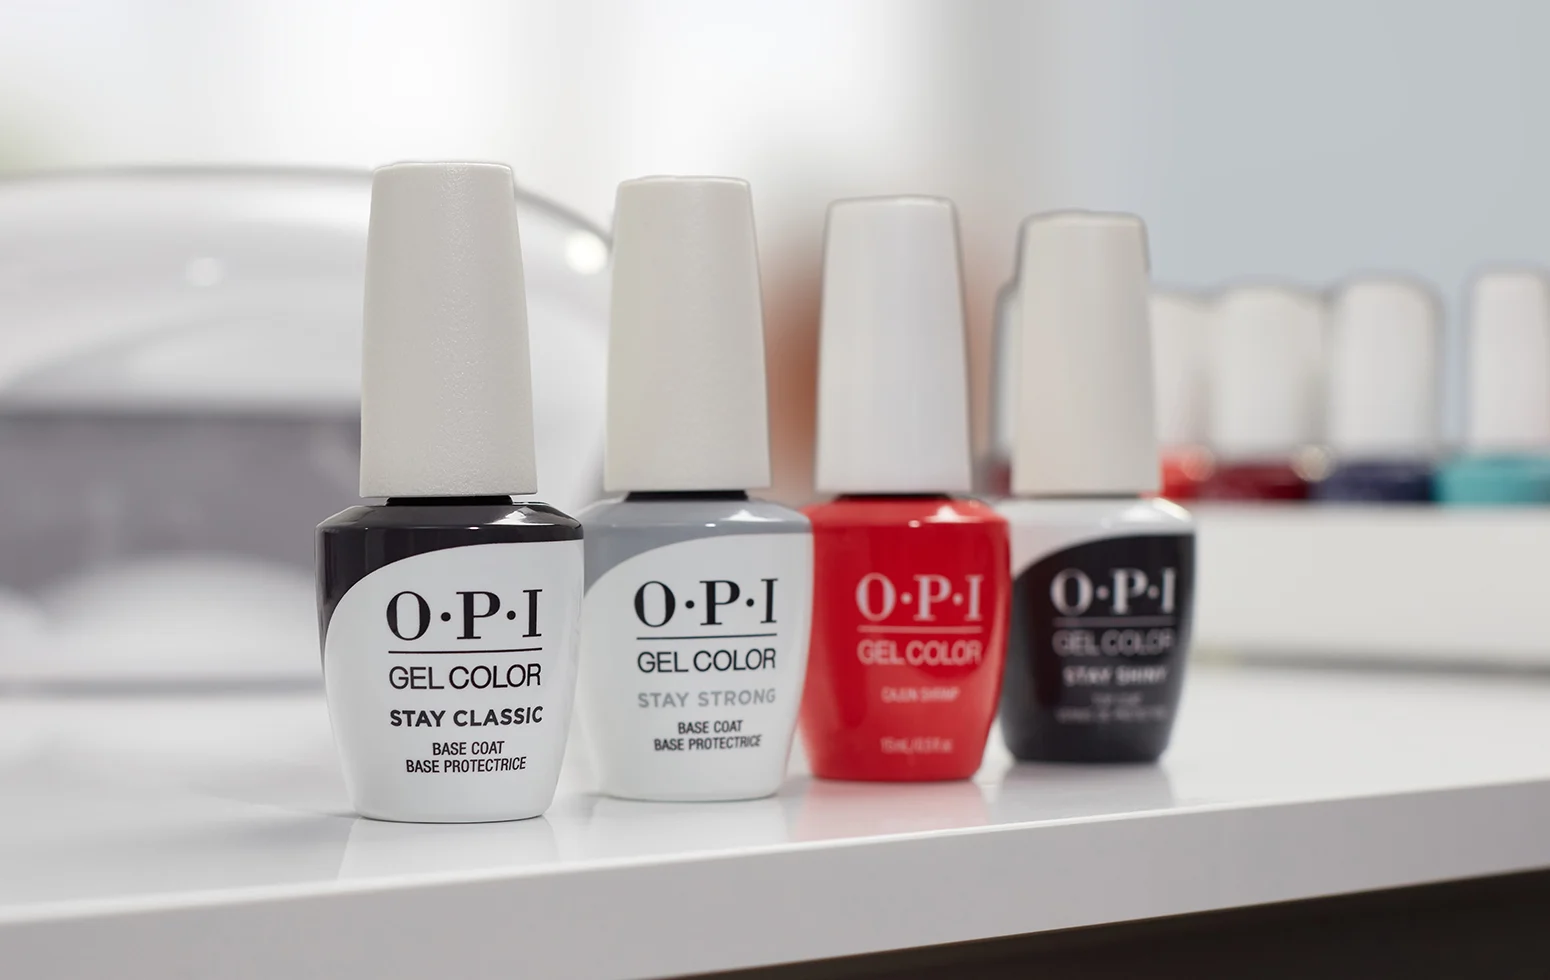 Introducing the New OPI GelColor Stay Strong Base Coat